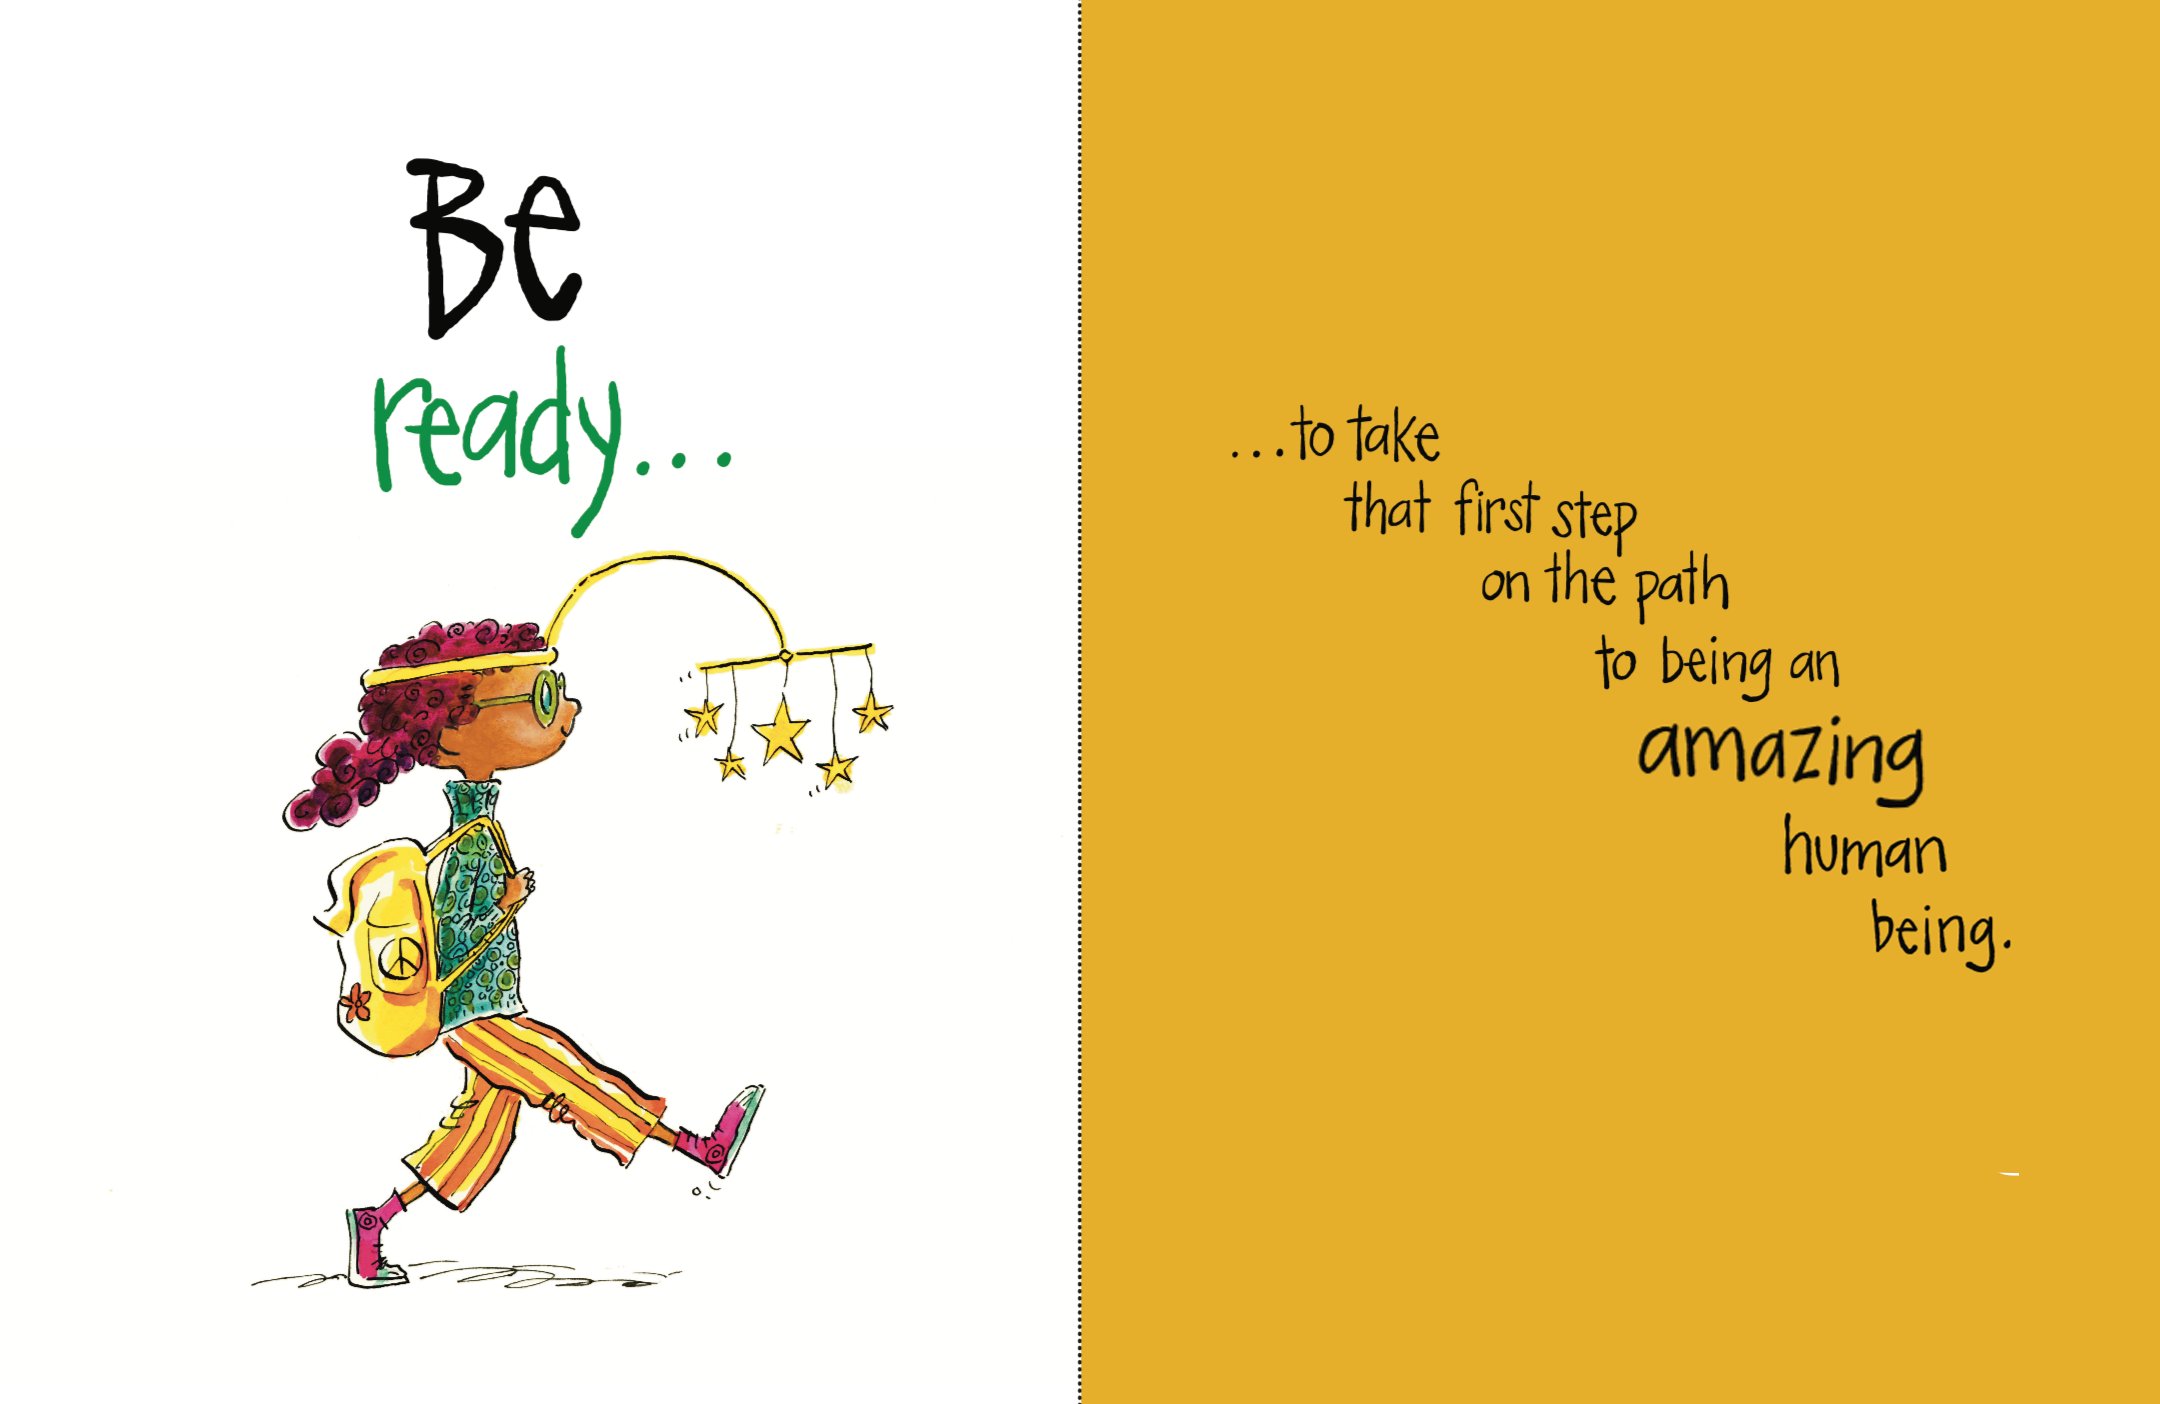 Peter H. Reynolds on Twitter: "BE ready... to BE YOU. My newest book: BE YOU. Published by @Scholastic - released today! Info at https://t.co/uZpXJv0JeV https://t.co/dG1KsZVFgG" / Twitter